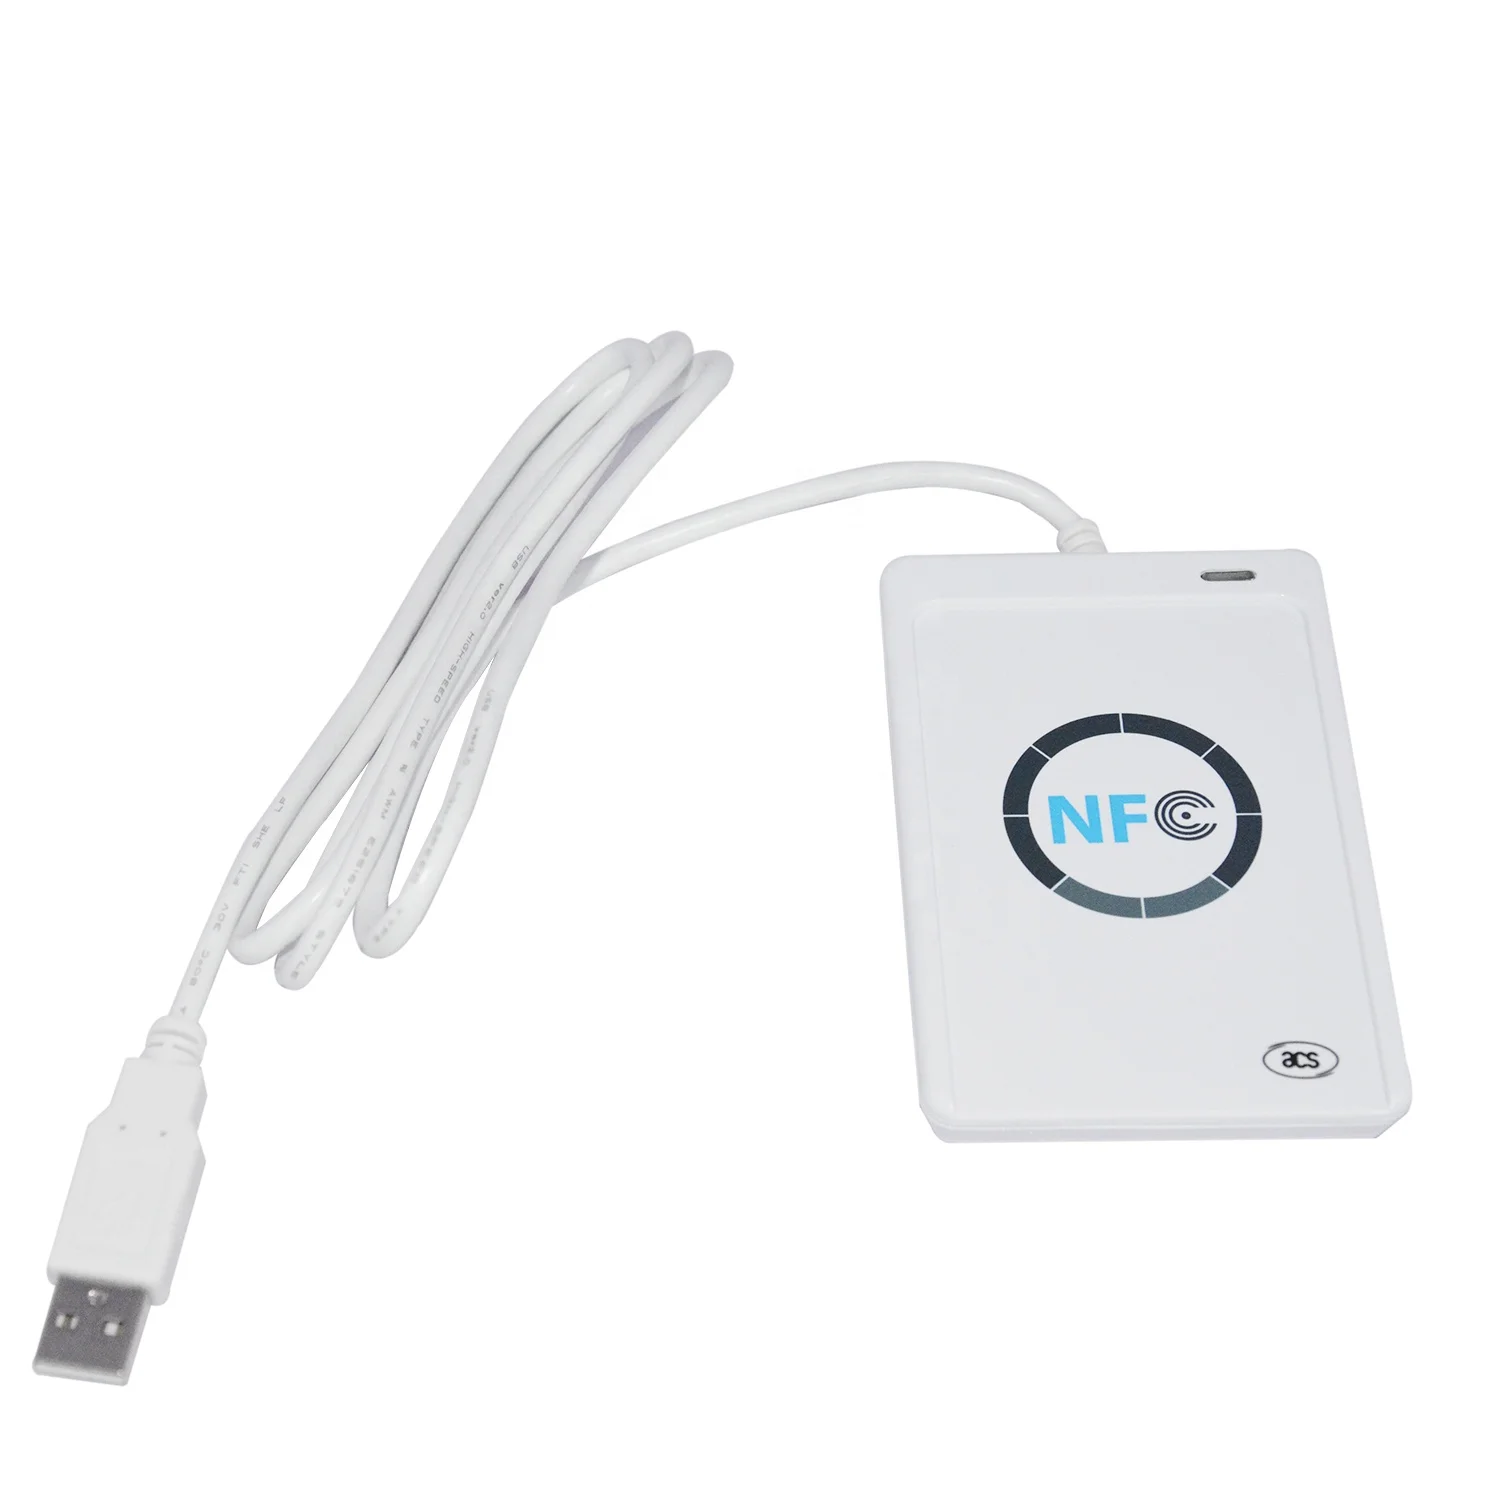 

13.56MHZ Rfid NFC Contactless Smart Card Reader ACR122U